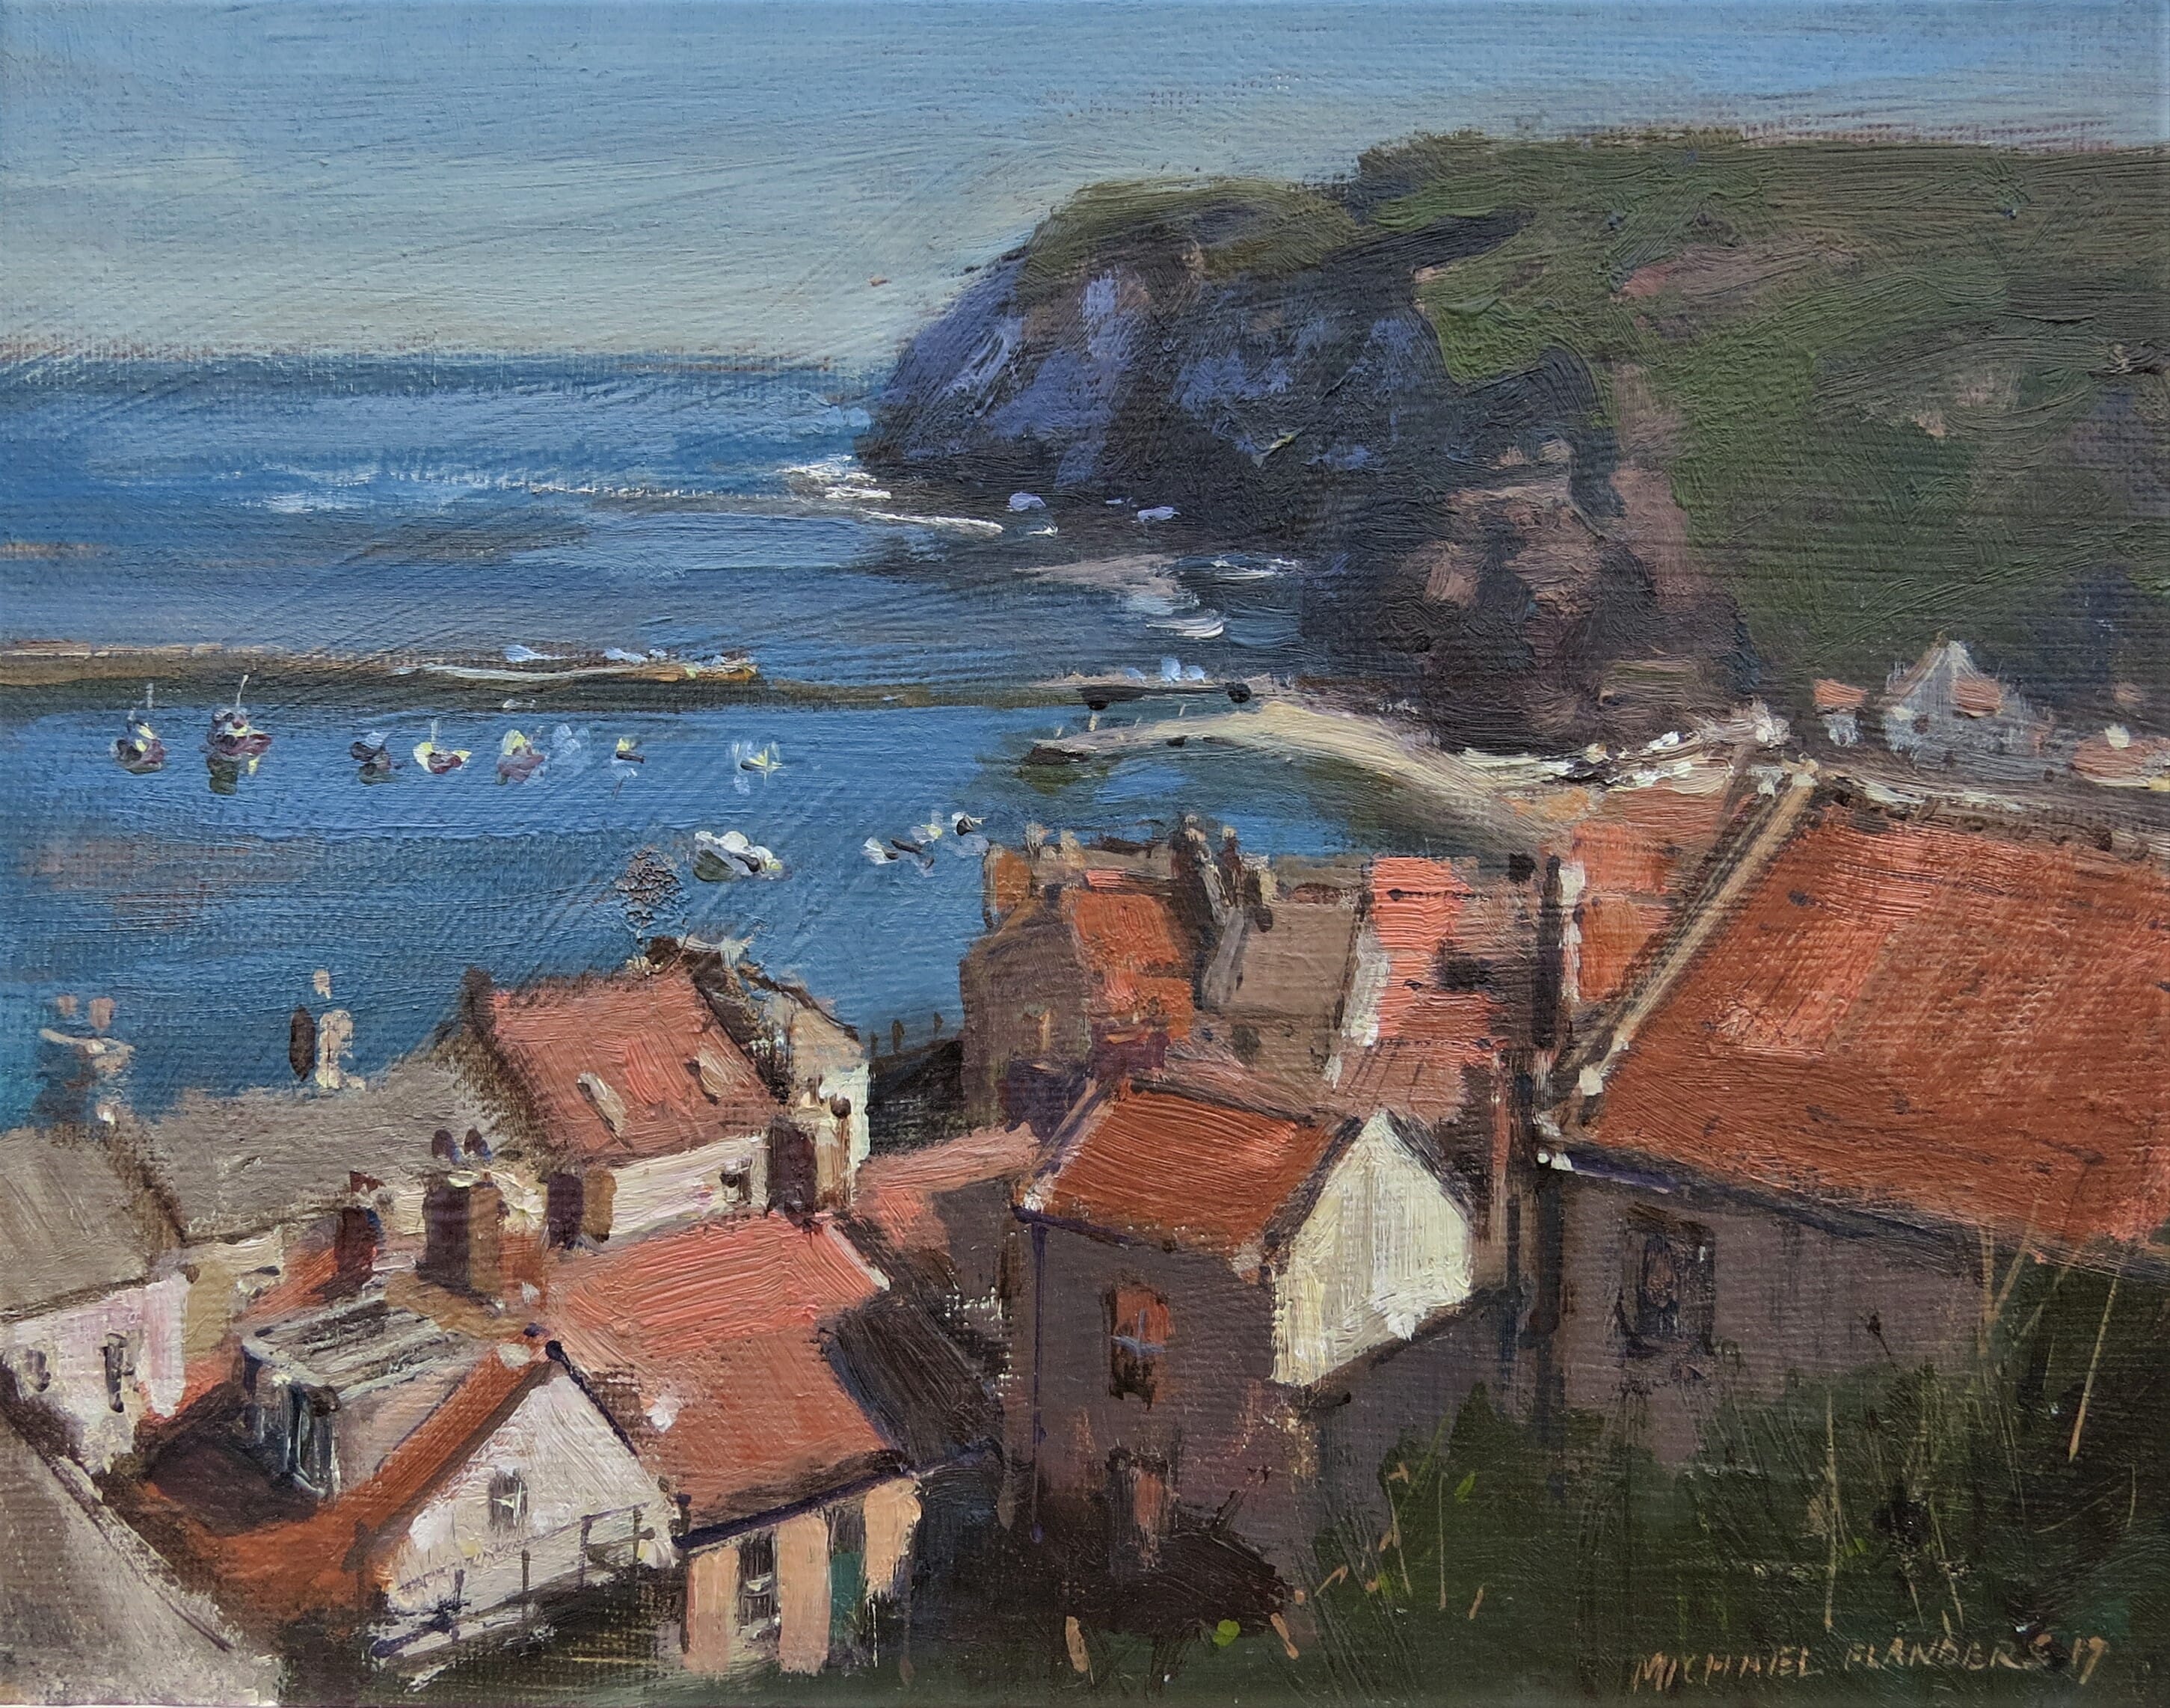  Roof Tops Overlooking the Sea, Staithes